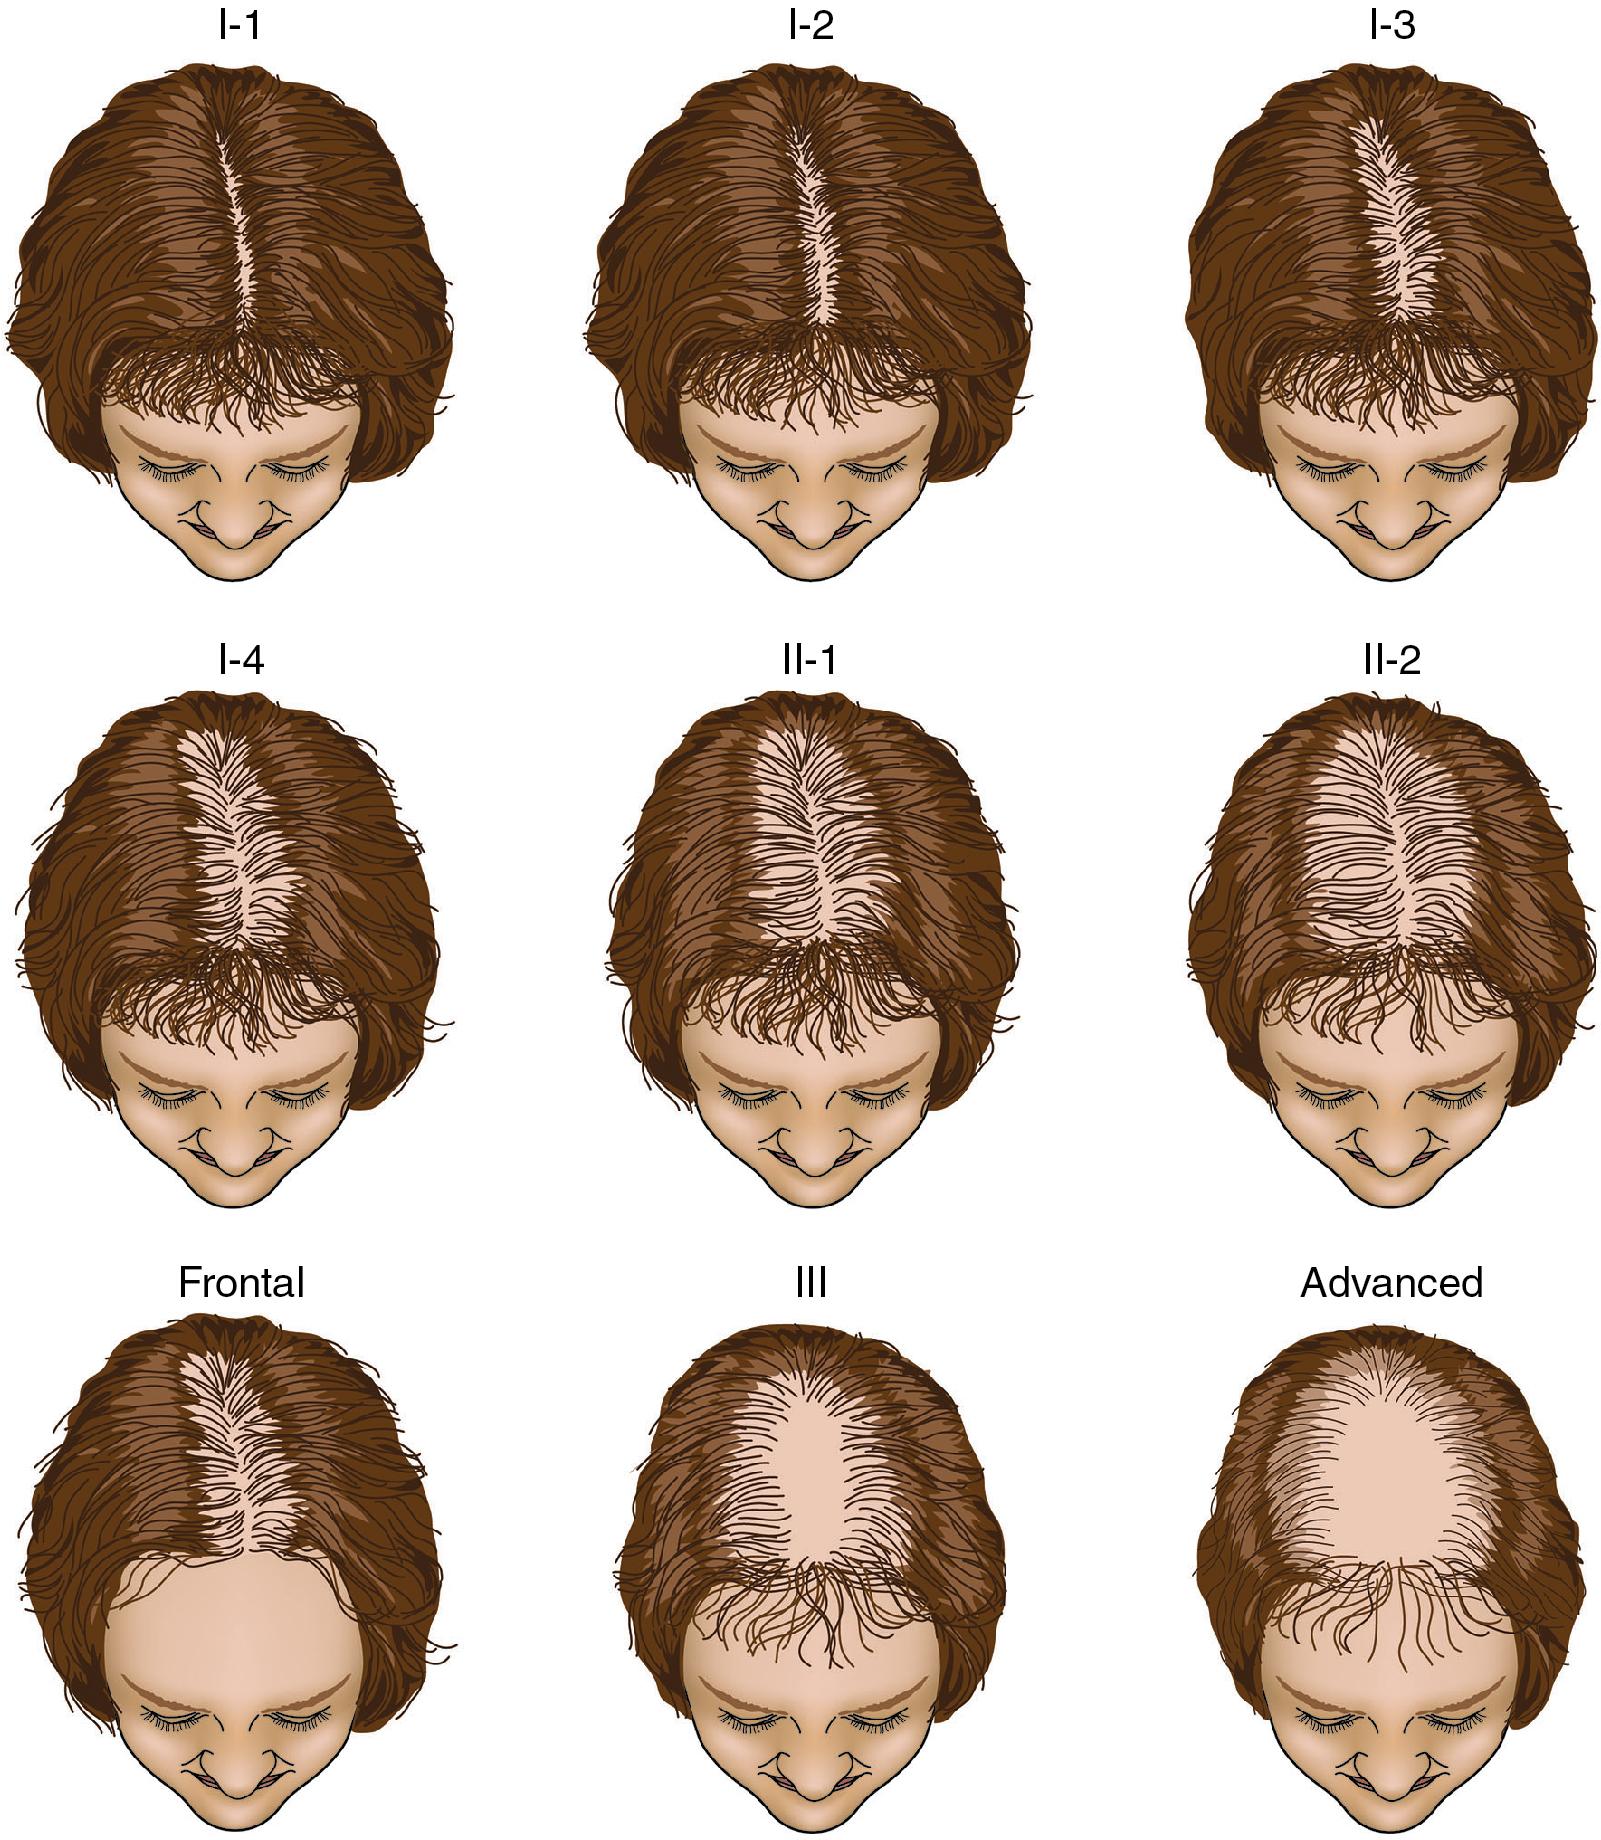 Fig. 15.1, The Savin scale is commonly used to assess female-pattern hair loss.